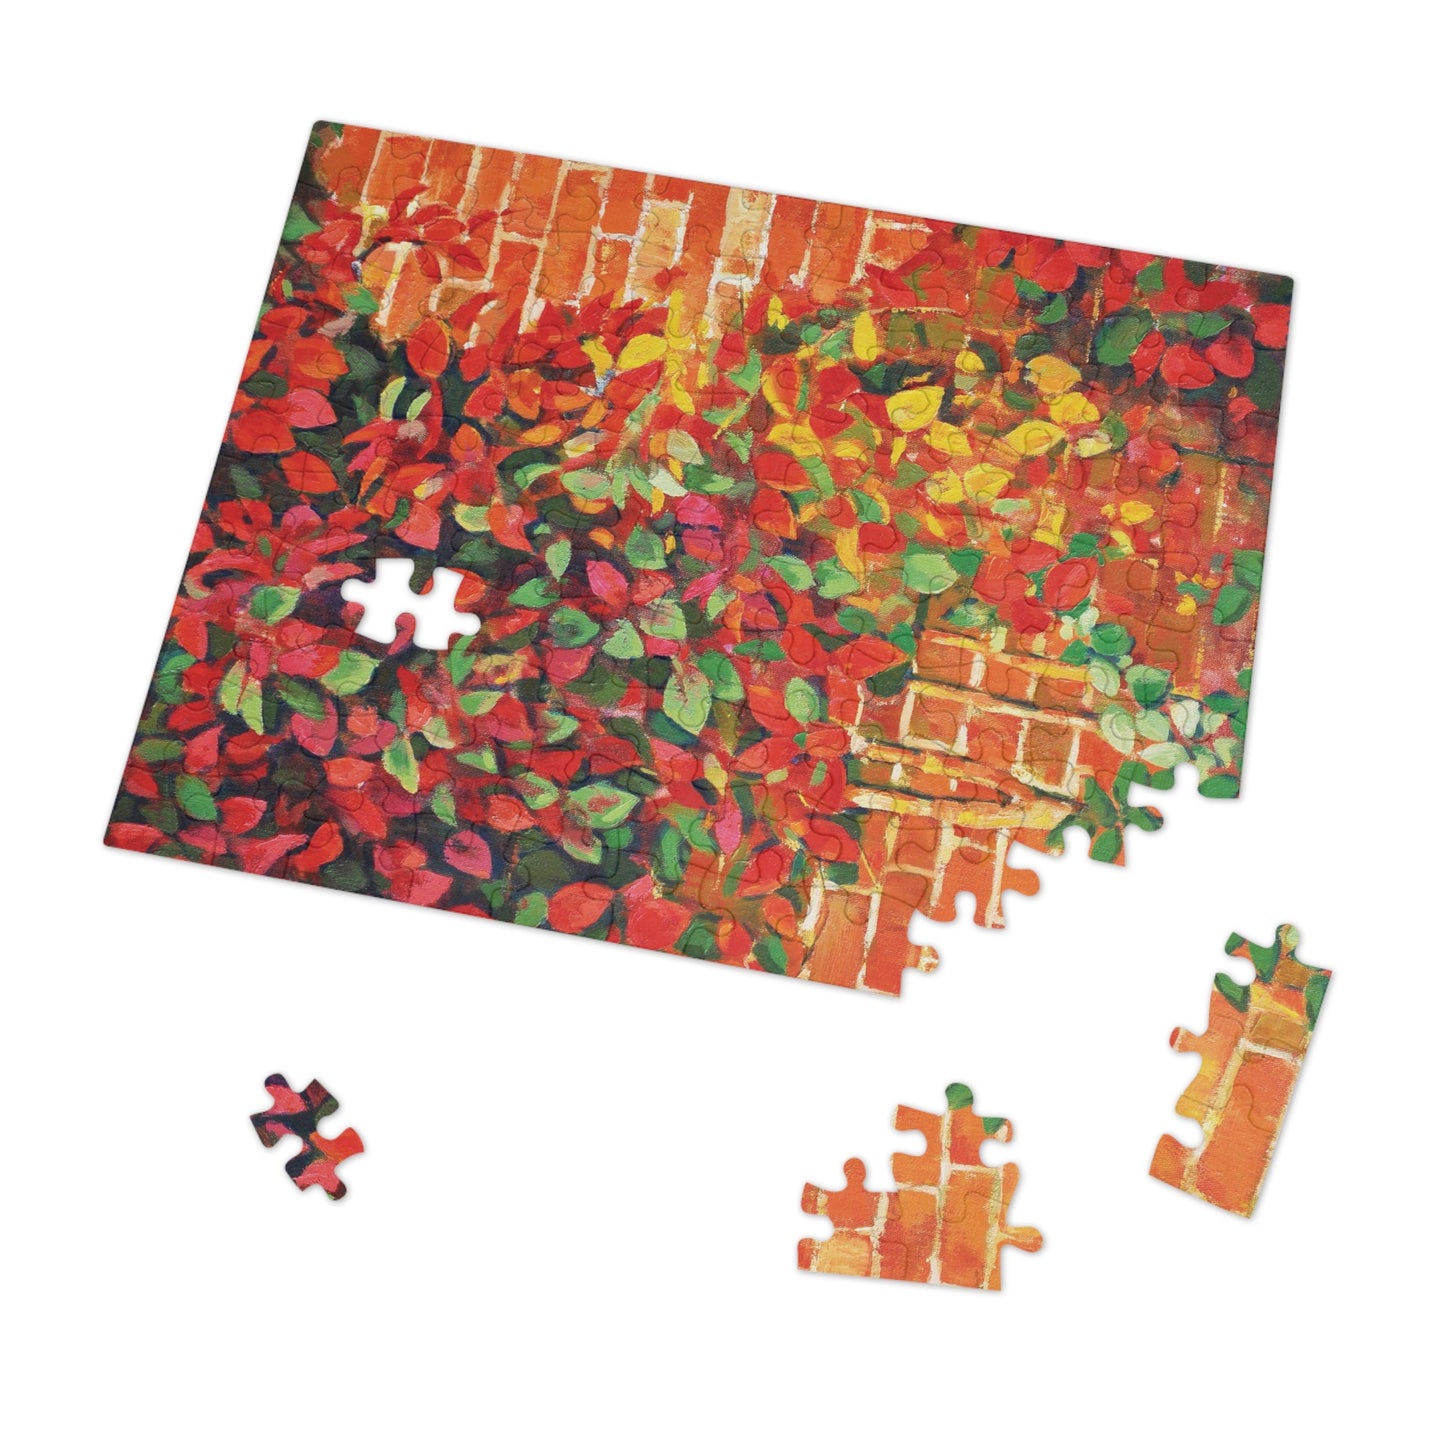 Jigsaw Puzzle - Impression on the Wall